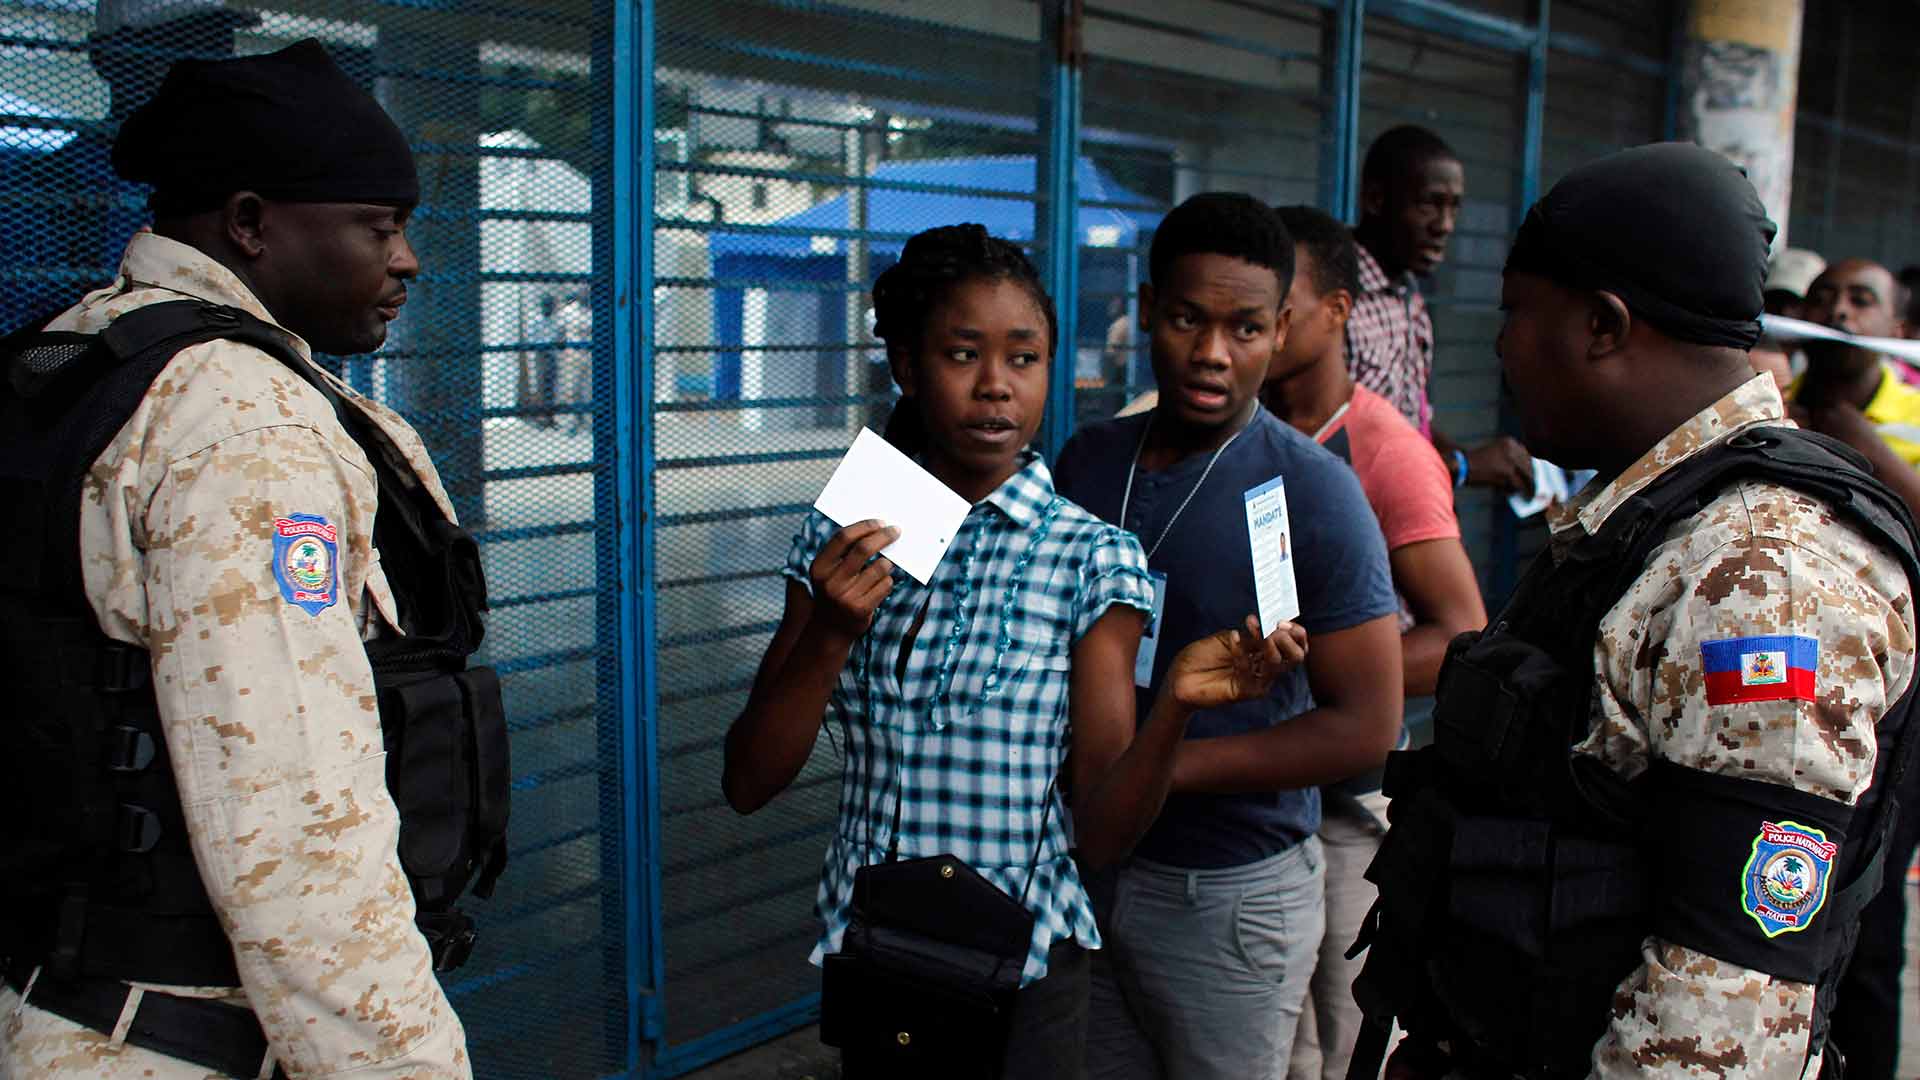 A voter shows her electoral documents to national police officers before entering a voting station in the Petion-Ville suburb of Port-au-Prince, Haiti, Sunday, Nov. 20, 2016. Haiti's repeatedly derailed presidential election got underway more than a year after an initial vote was annulled. (AP Photo/Ricardo Arduengo)